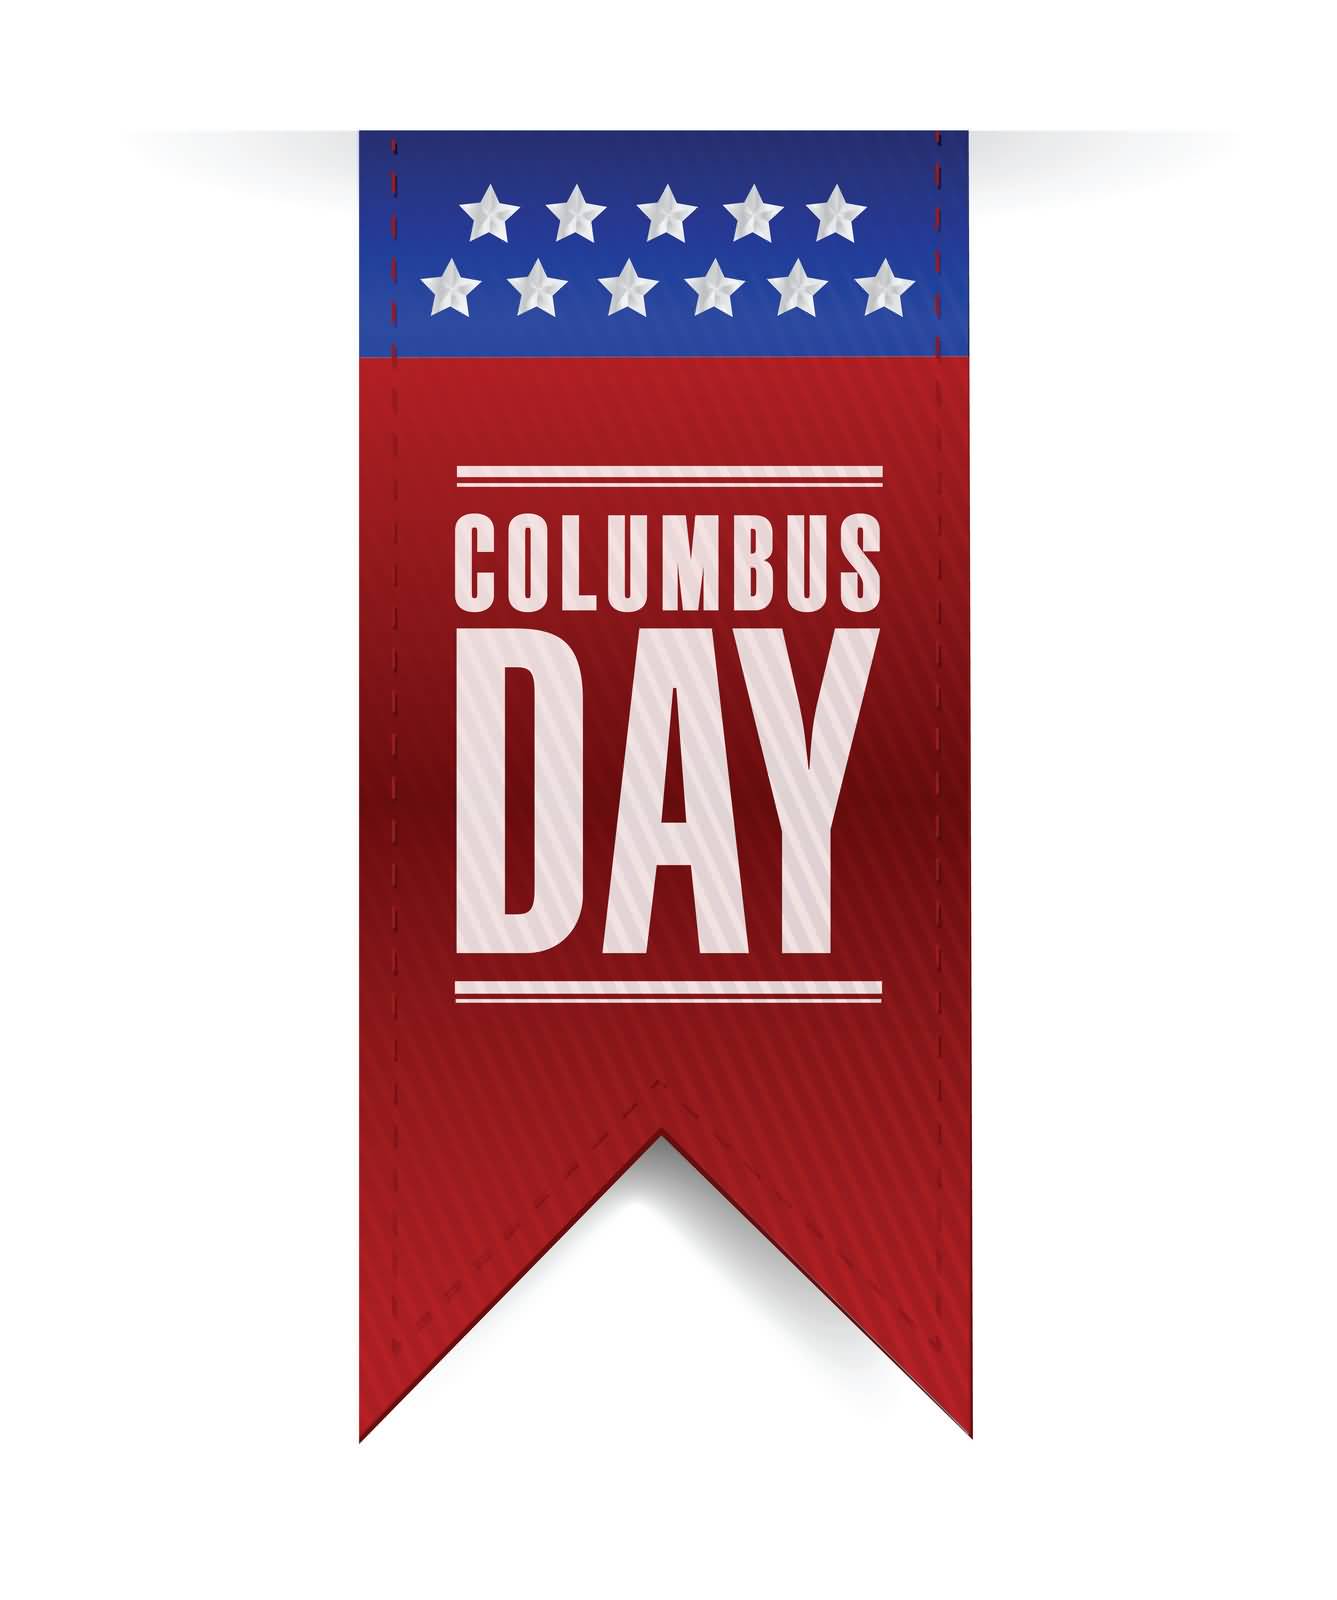 60 Beautiful Happy Columbus Day 2016 Greeting Pictures And Photos1337 x 1600